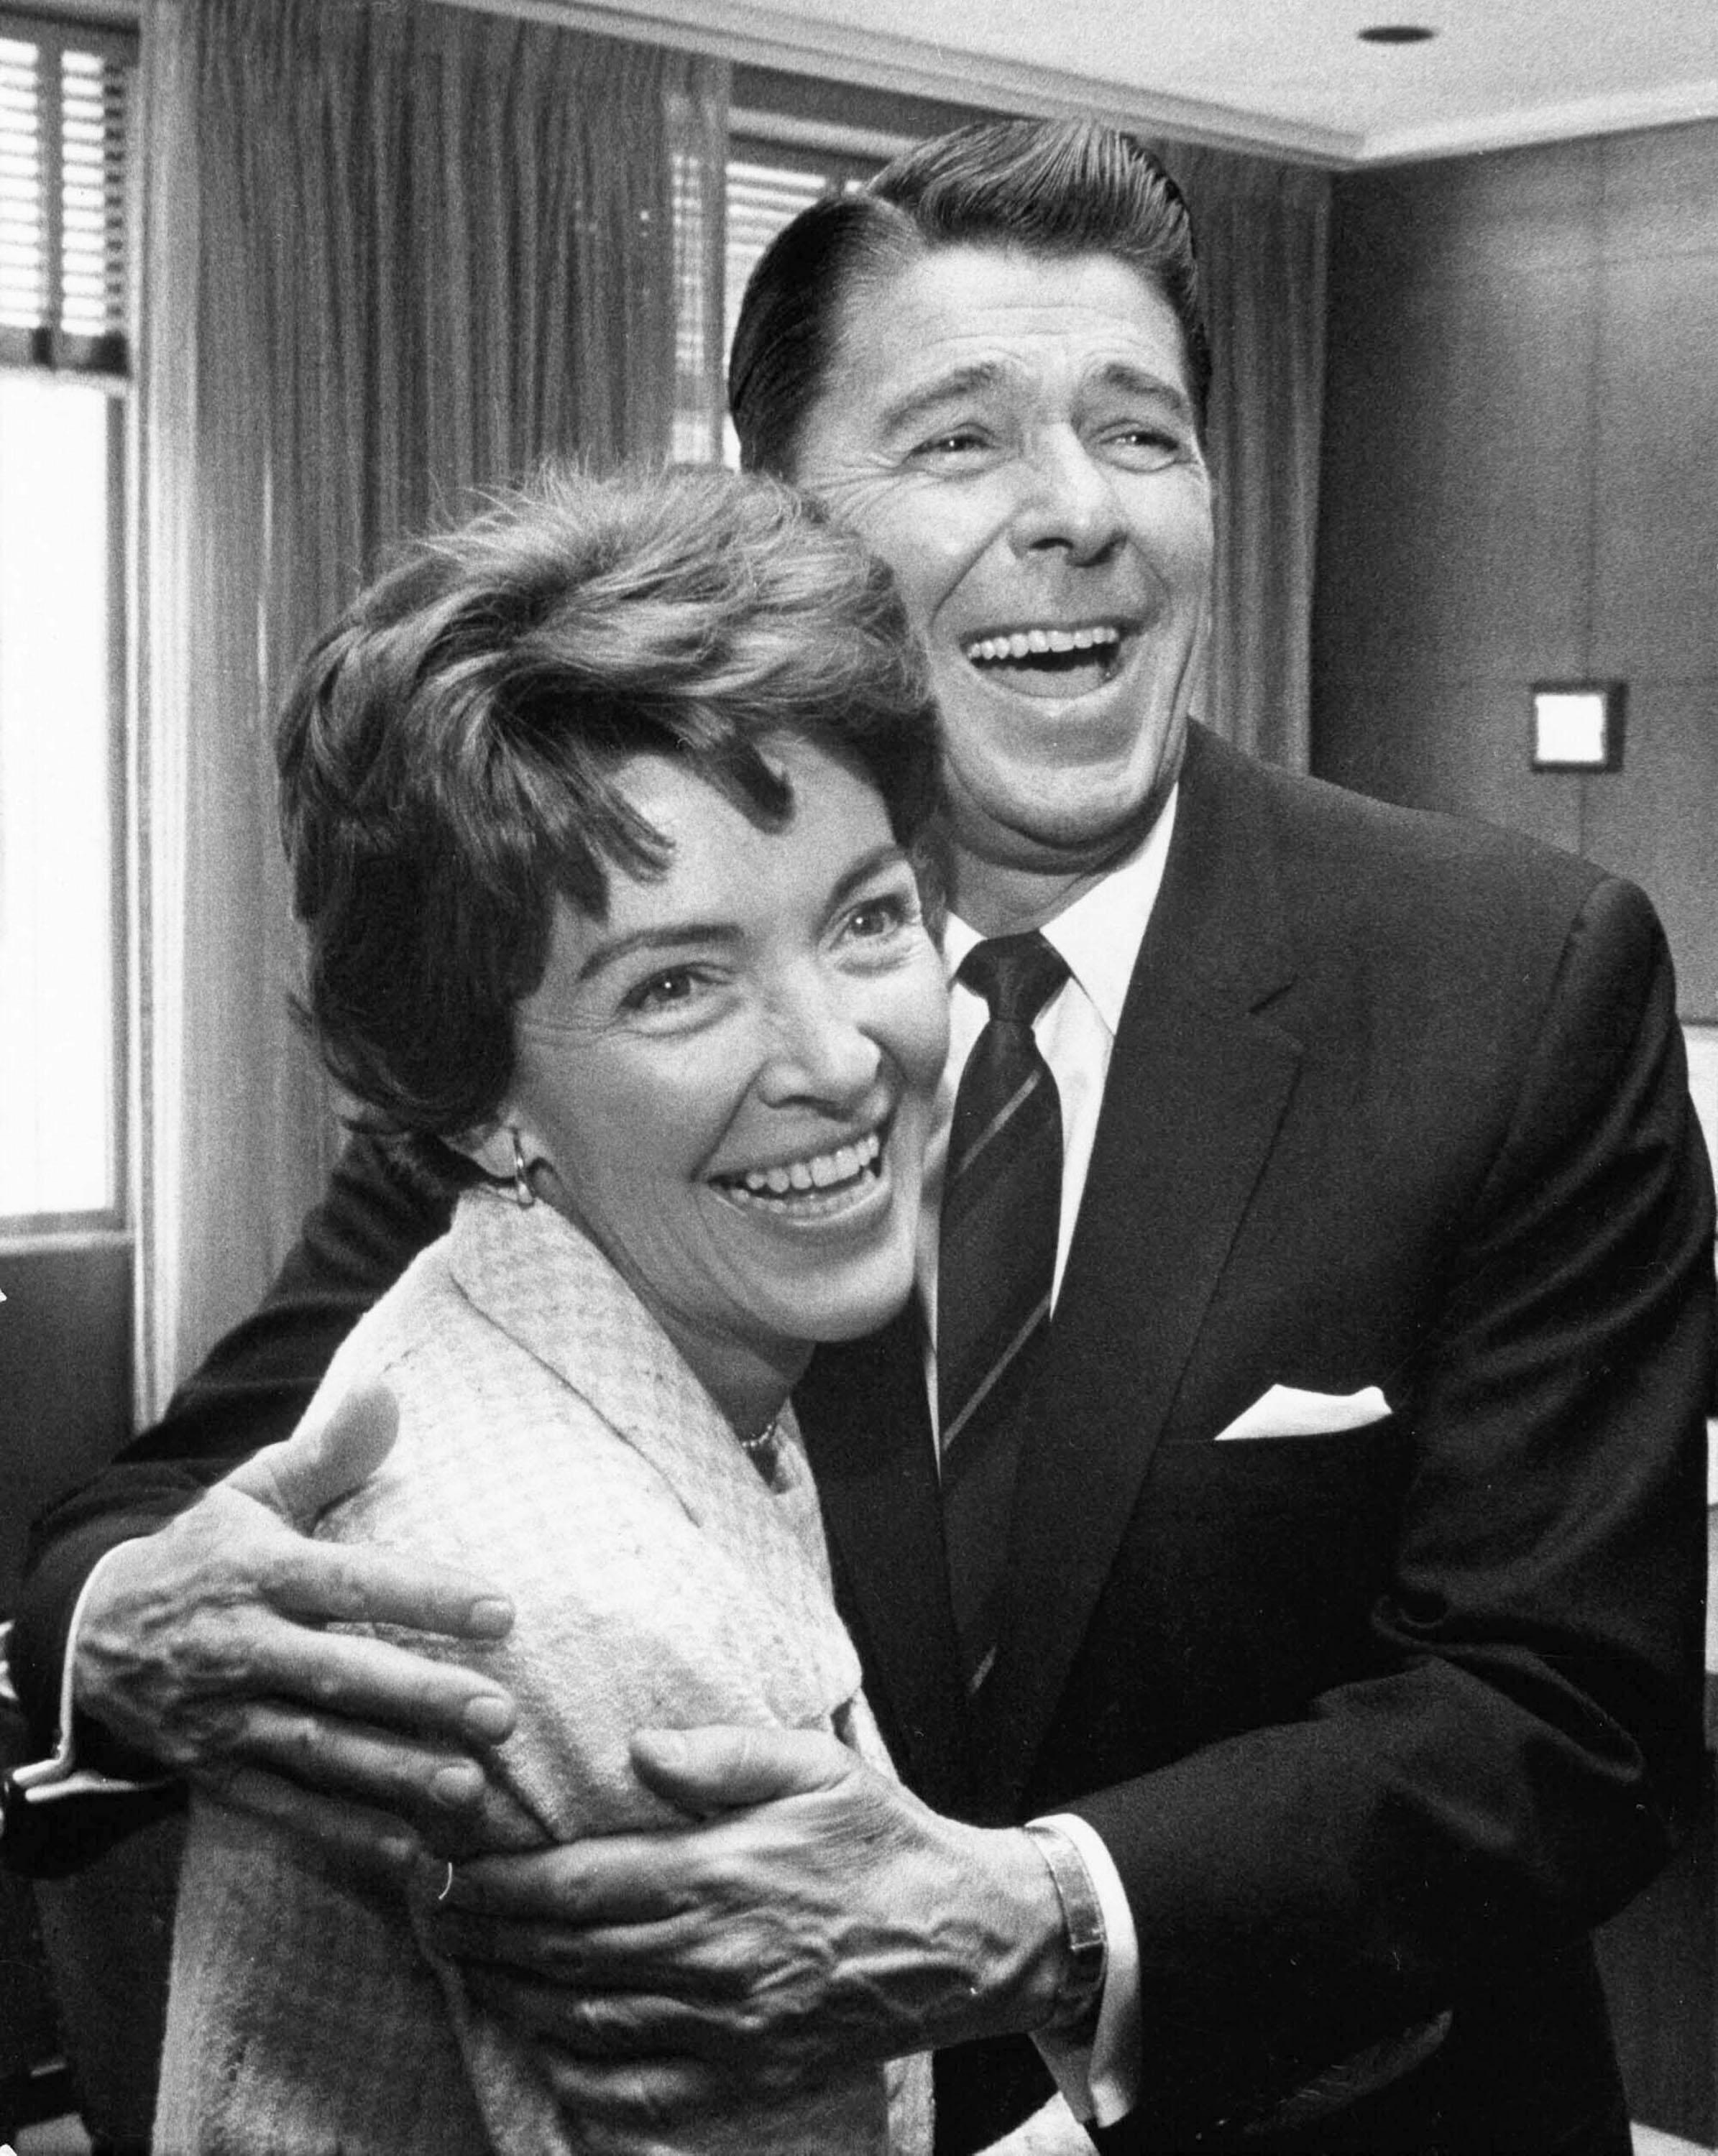 Nancy Reagan history the real story of her time in Hollywood. image picture image